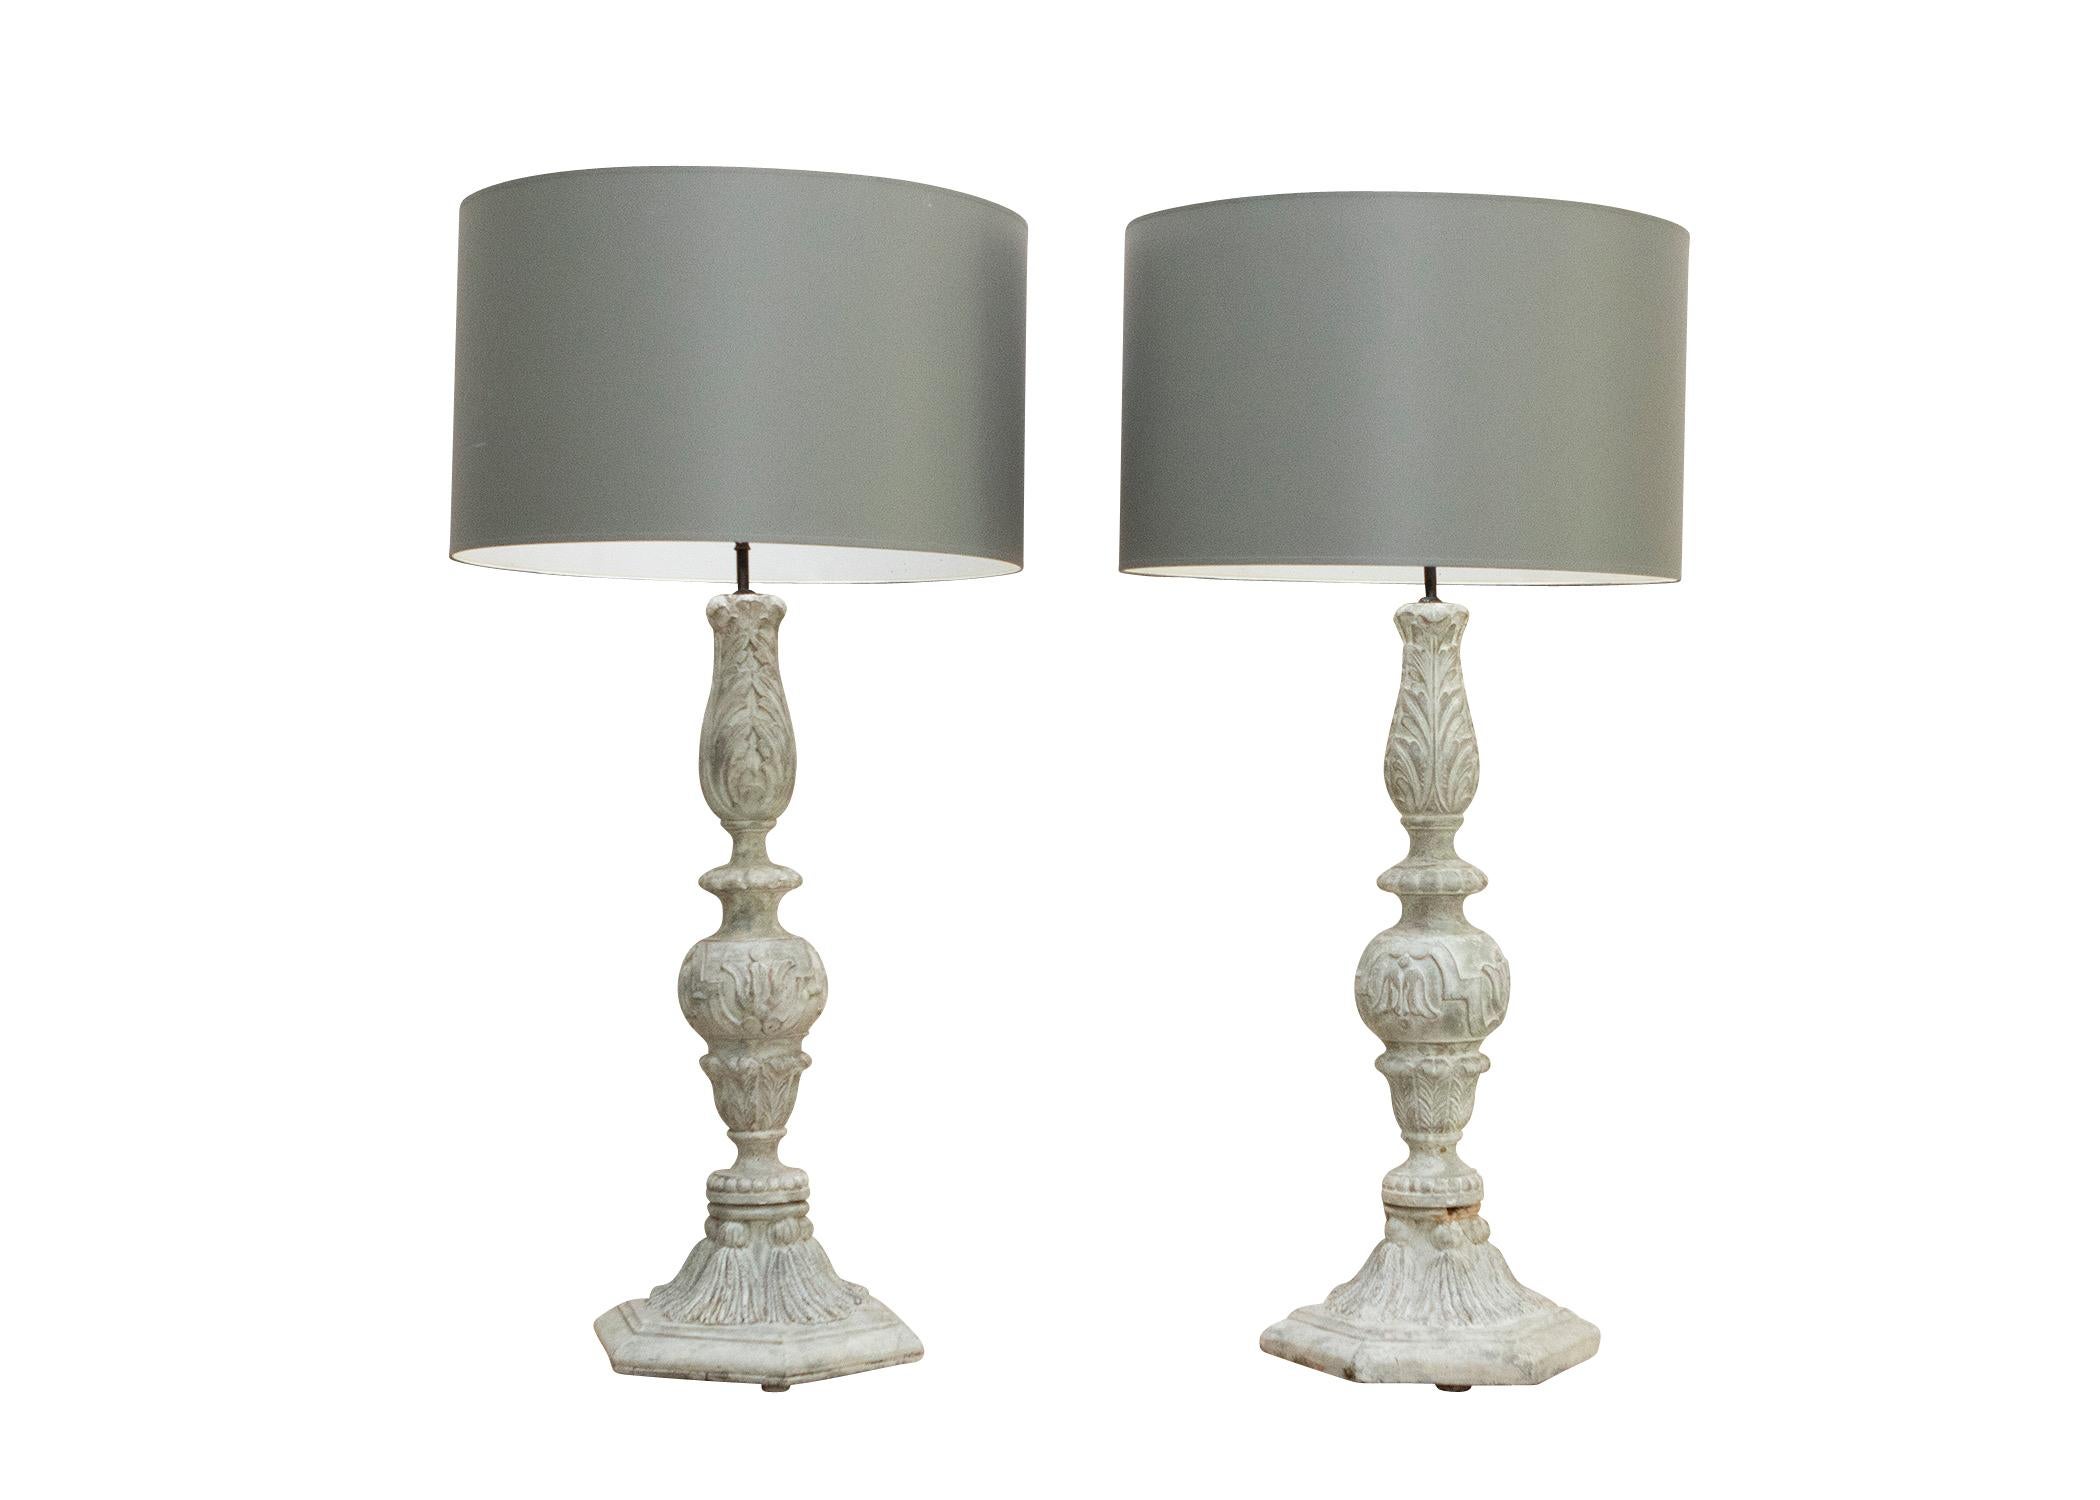 Oversized carved wooden finial lamps with classical decoration and grey drum shades. Painted to look like stone finials with tassel decorated bases and foliate design. 30 inches in height without shades, 42.5 inches with grey drum shades.